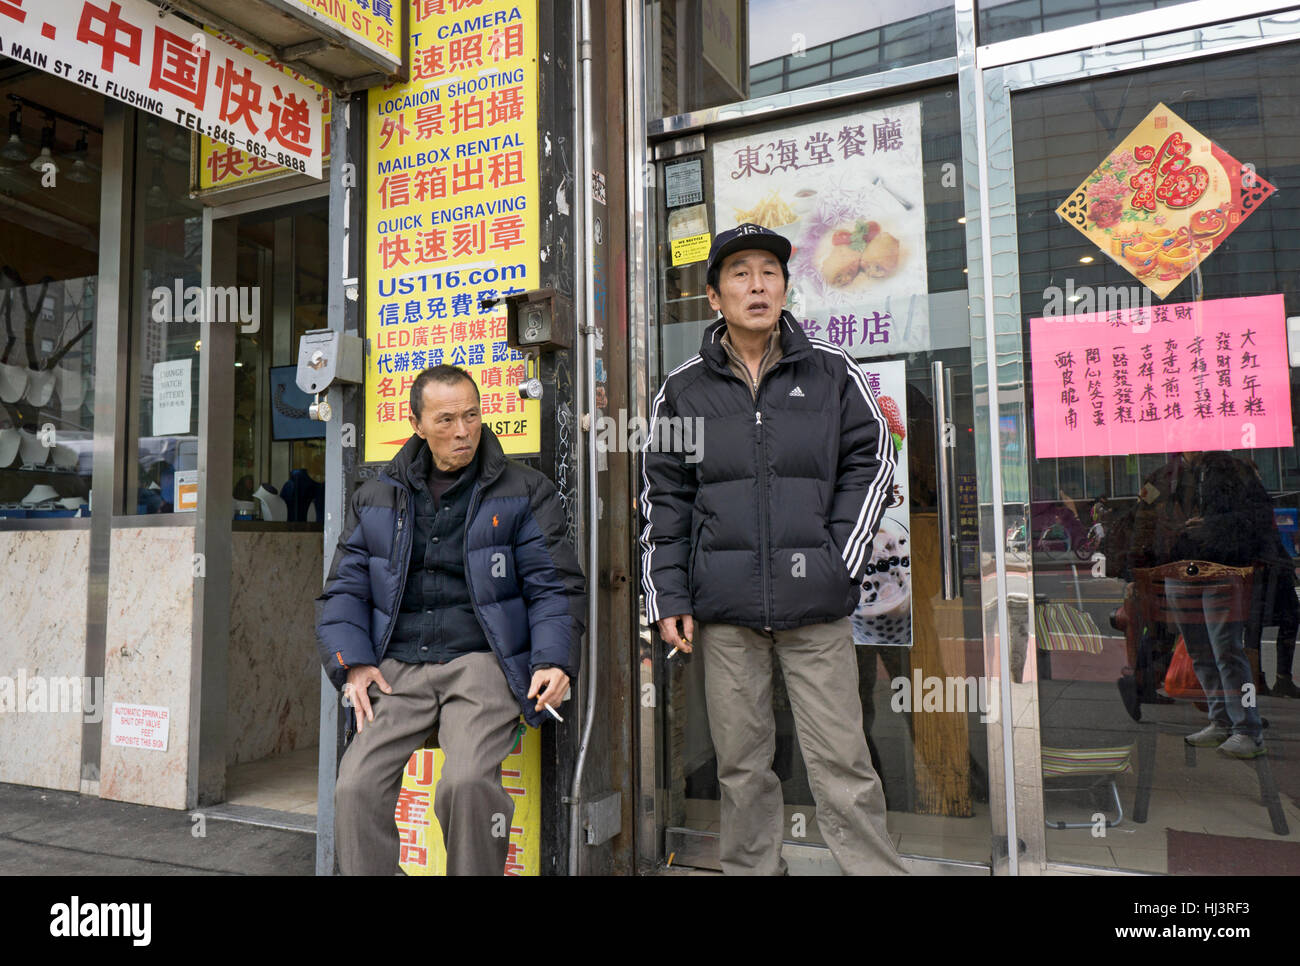 Two Chinese American workers outside on a smoking break on Main Street in Chinatown, Flushing, Queens, New York. Stock Photo